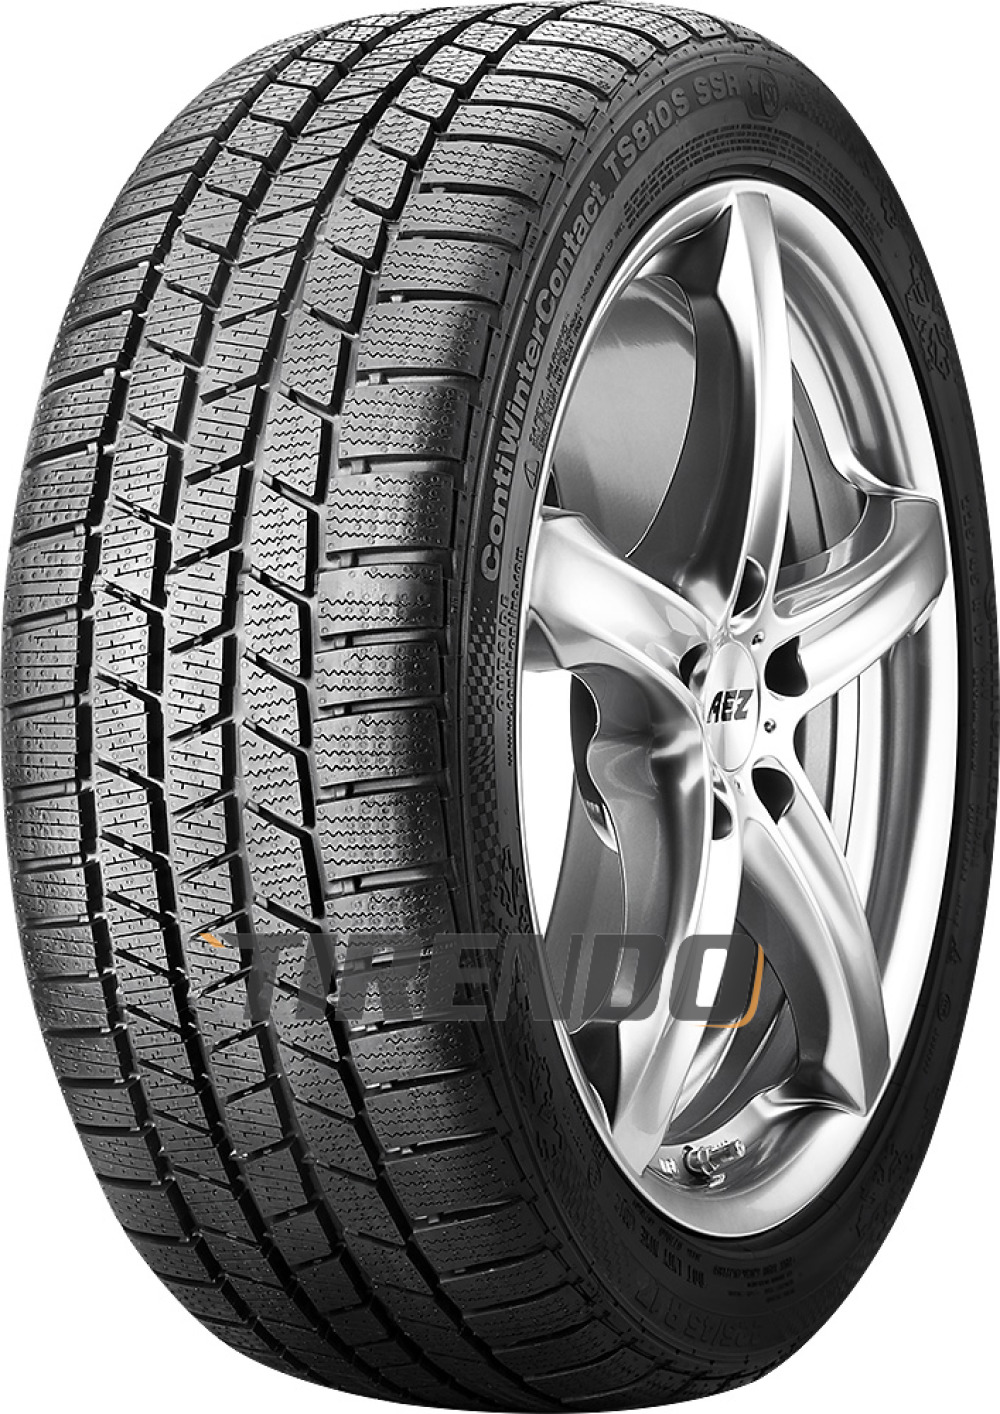 Image of Continental ContiWinterContact TS 810 S SSR ( 245/55 R17 102H *, runflat )